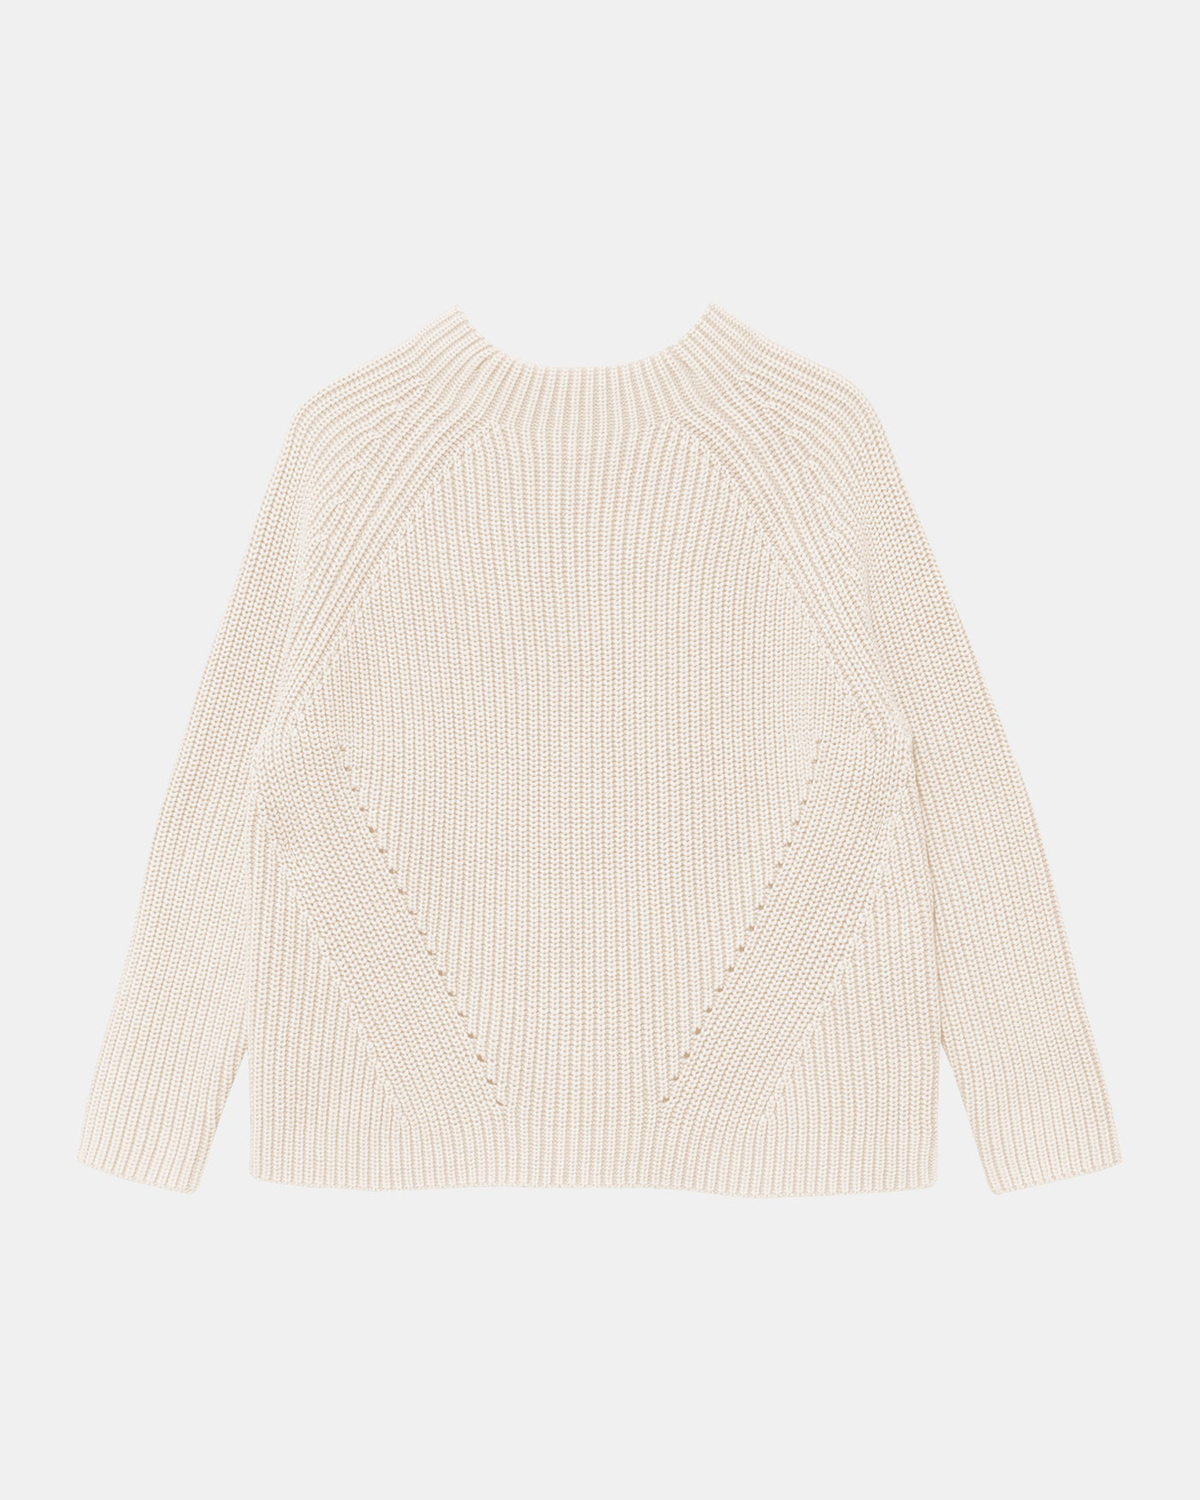 Daphne Sweater in Off White